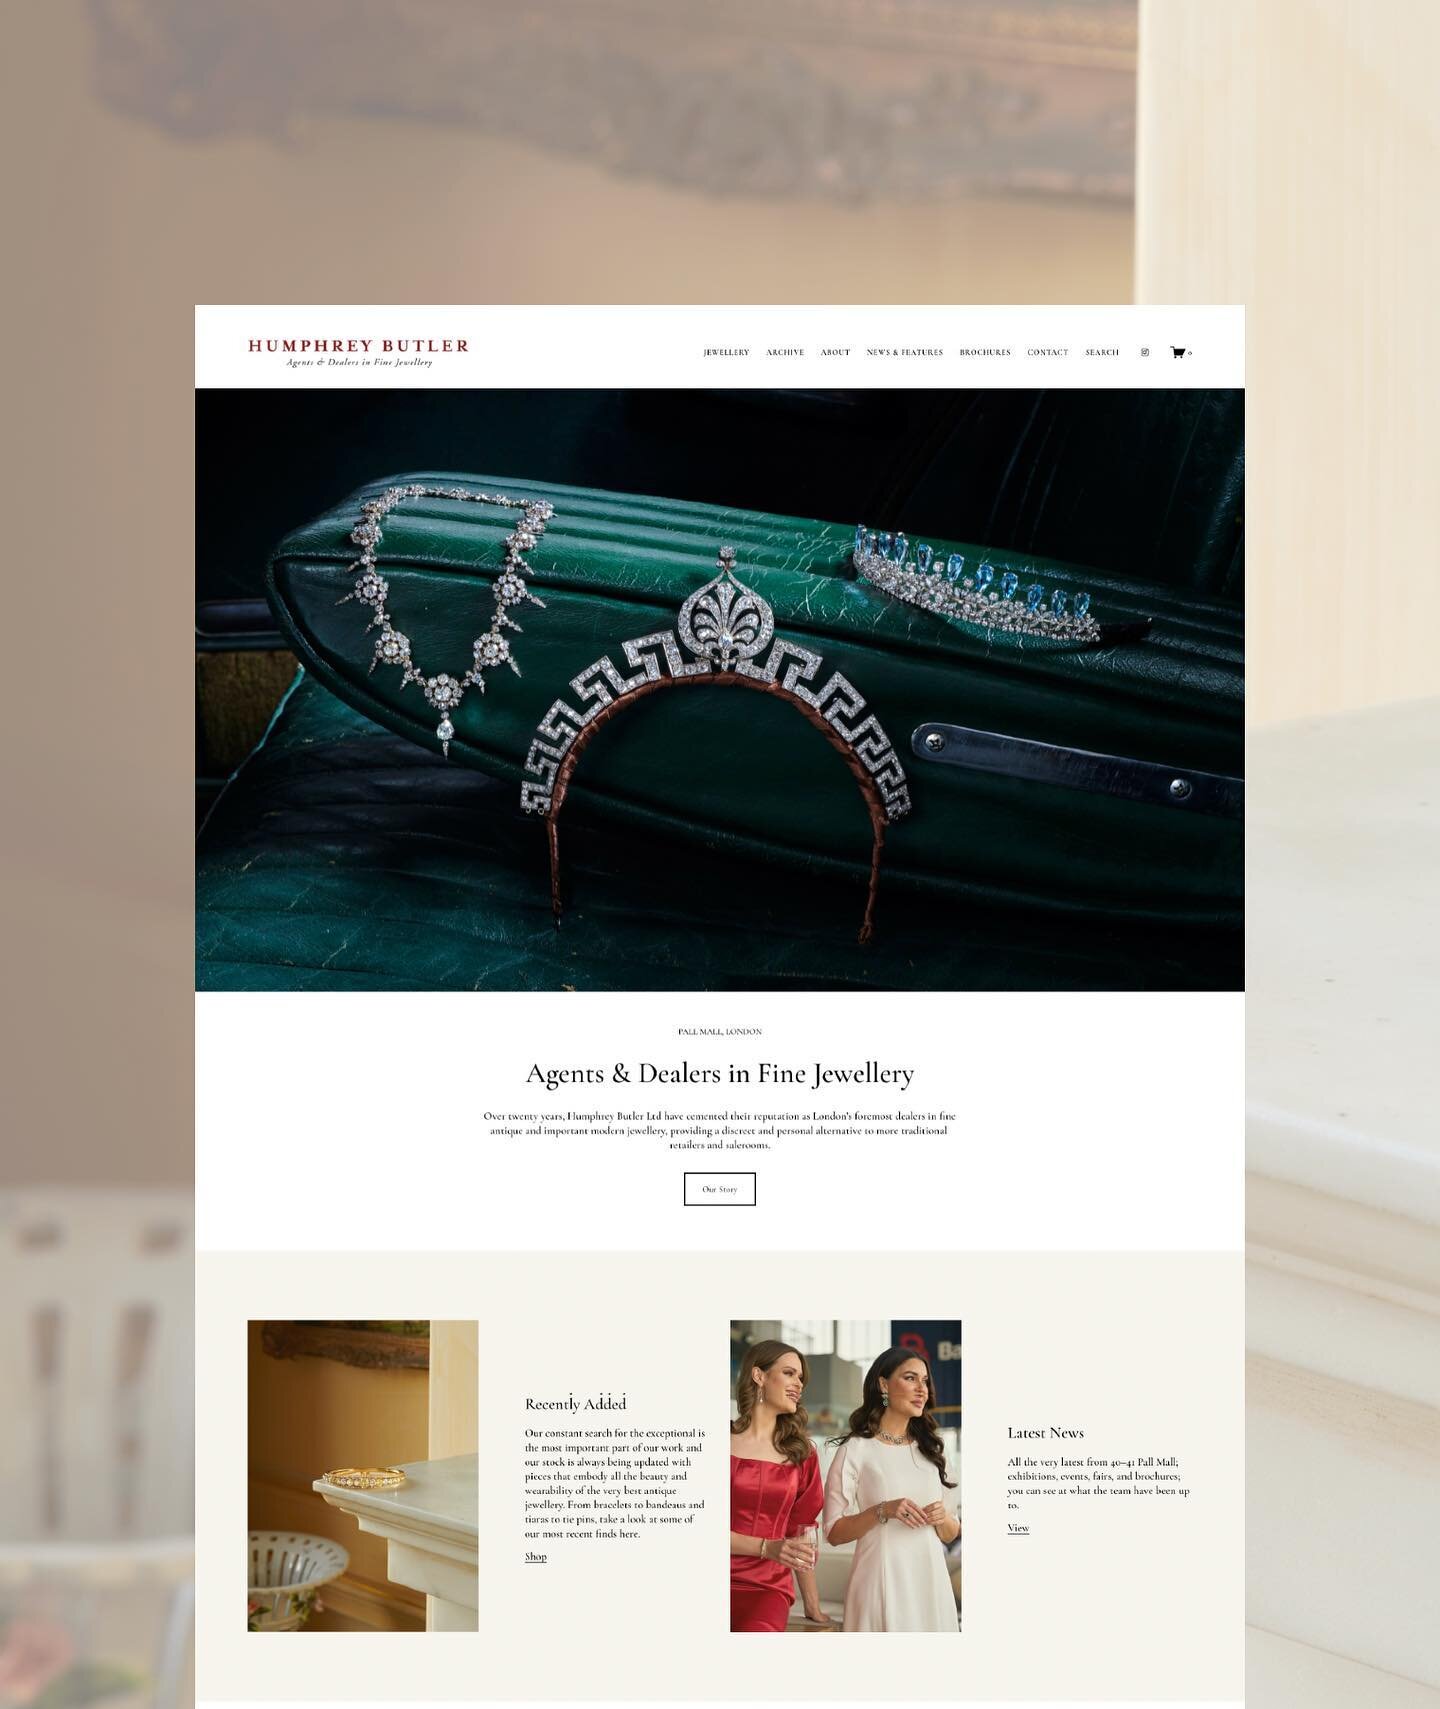 Website design and build for London-based &lsquo;Agents &amp; Dealers in fine jewellery&rsquo; Humphrey Butler.

&ldquo;For over twenty years, Humphrey Butler have cemented their reputation as London&rsquo;s foremost dealers in fine antique and impor